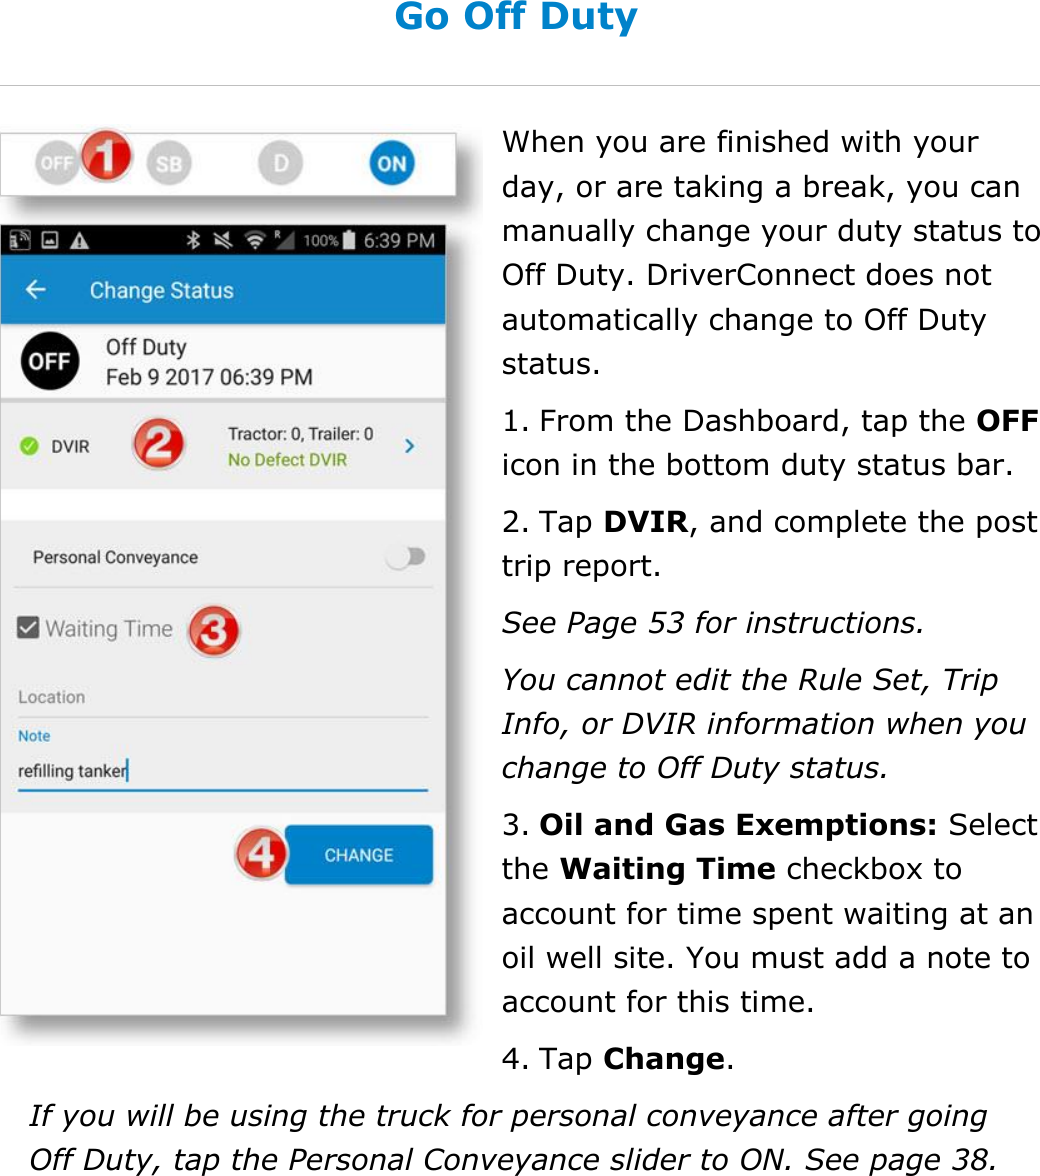 Set My Duty Status DriverConnect User Guide  35 © 2017, Rand McNally, Inc. Go Off Duty When you are finished with your day, or are taking a break, you can manually change your duty status to Off Duty. DriverConnect does not automatically change to Off Duty status. 1. From the Dashboard, tap the OFF icon in the bottom duty status bar. 2. Tap DVIR, and complete the post trip report. See Page 53 for instructions. You cannot edit the Rule Set, Trip Info, or DVIR information when you change to Off Duty status. 3. Oil and Gas Exemptions: Select the Waiting Time checkbox to account for time spent waiting at an oil well site. You must add a note to account for this time. 4. Tap Change. If you will be using the truck for personal conveyance after going Off Duty, tap the Personal Conveyance slider to ON. See page 38.   